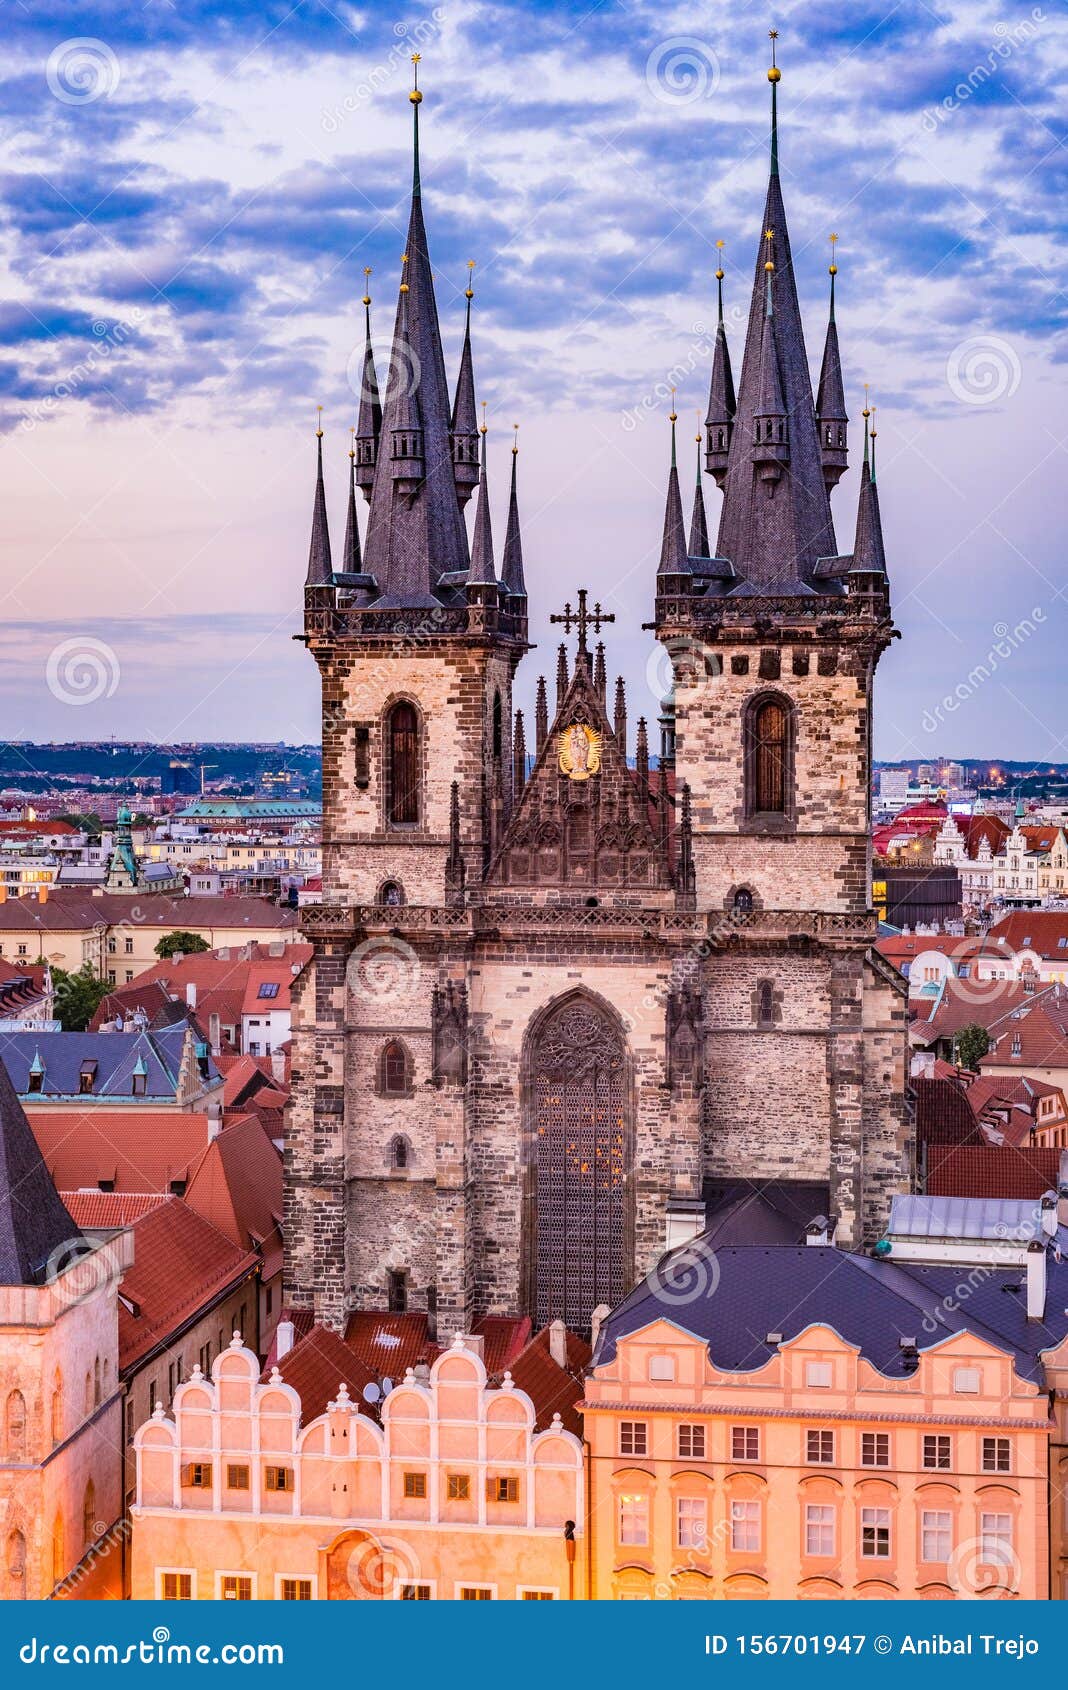 Old Town Square In Prague Czech Republic Stock Image Image Of Lady